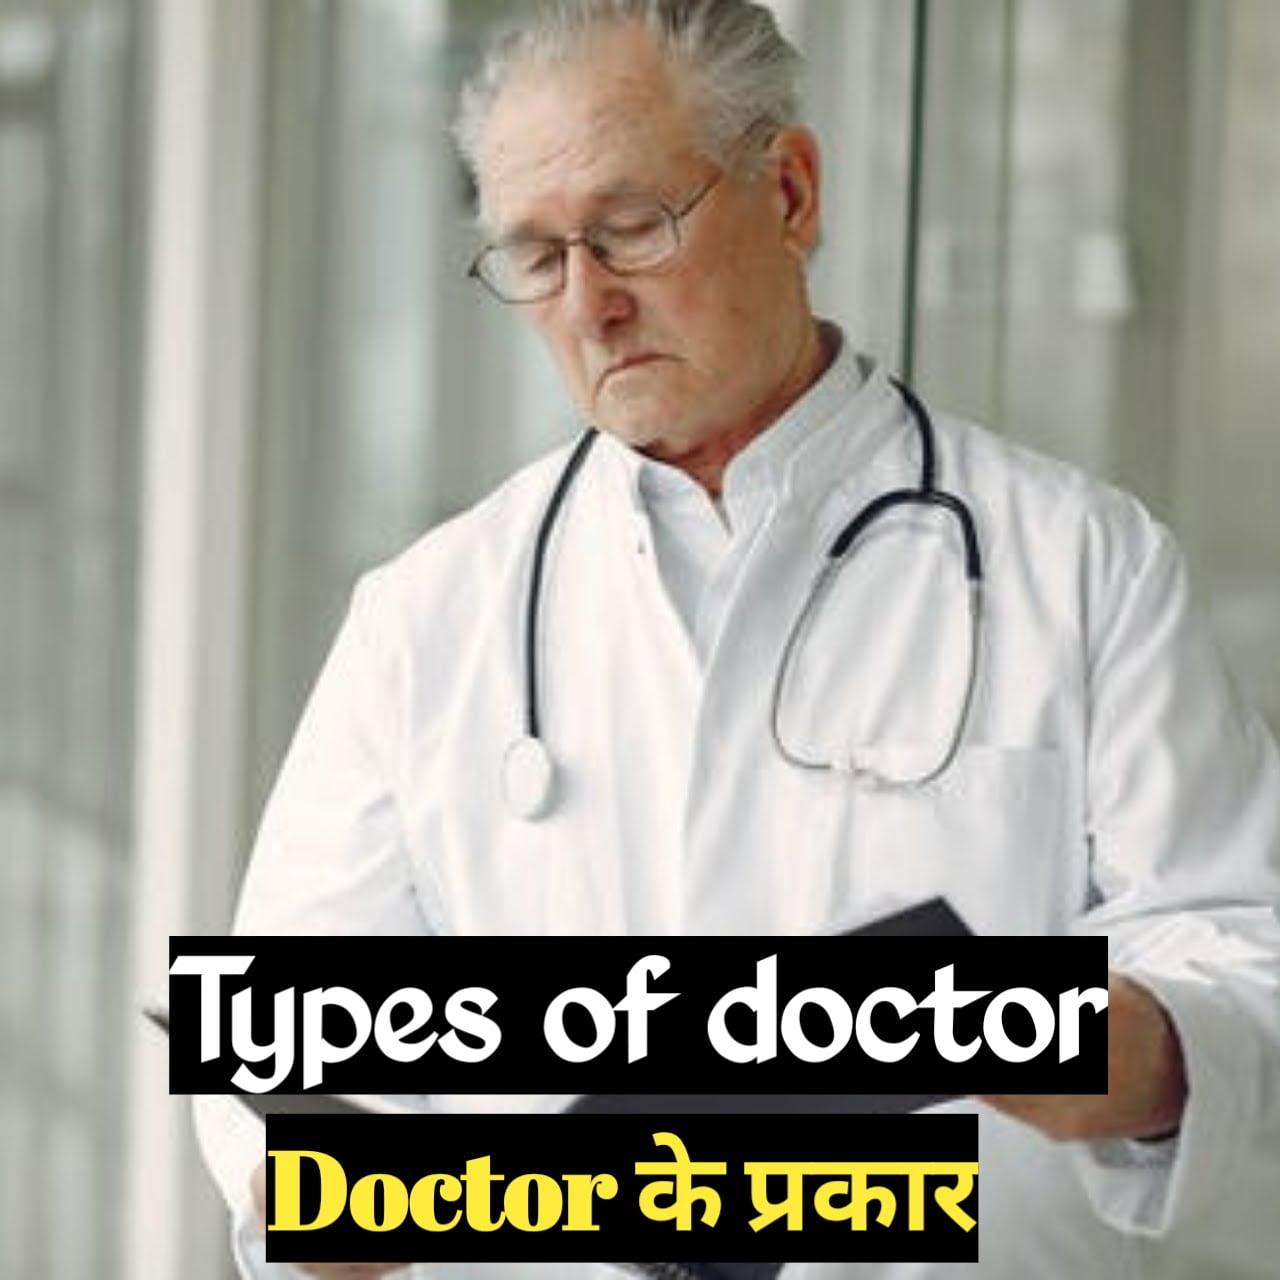 Types of doctor